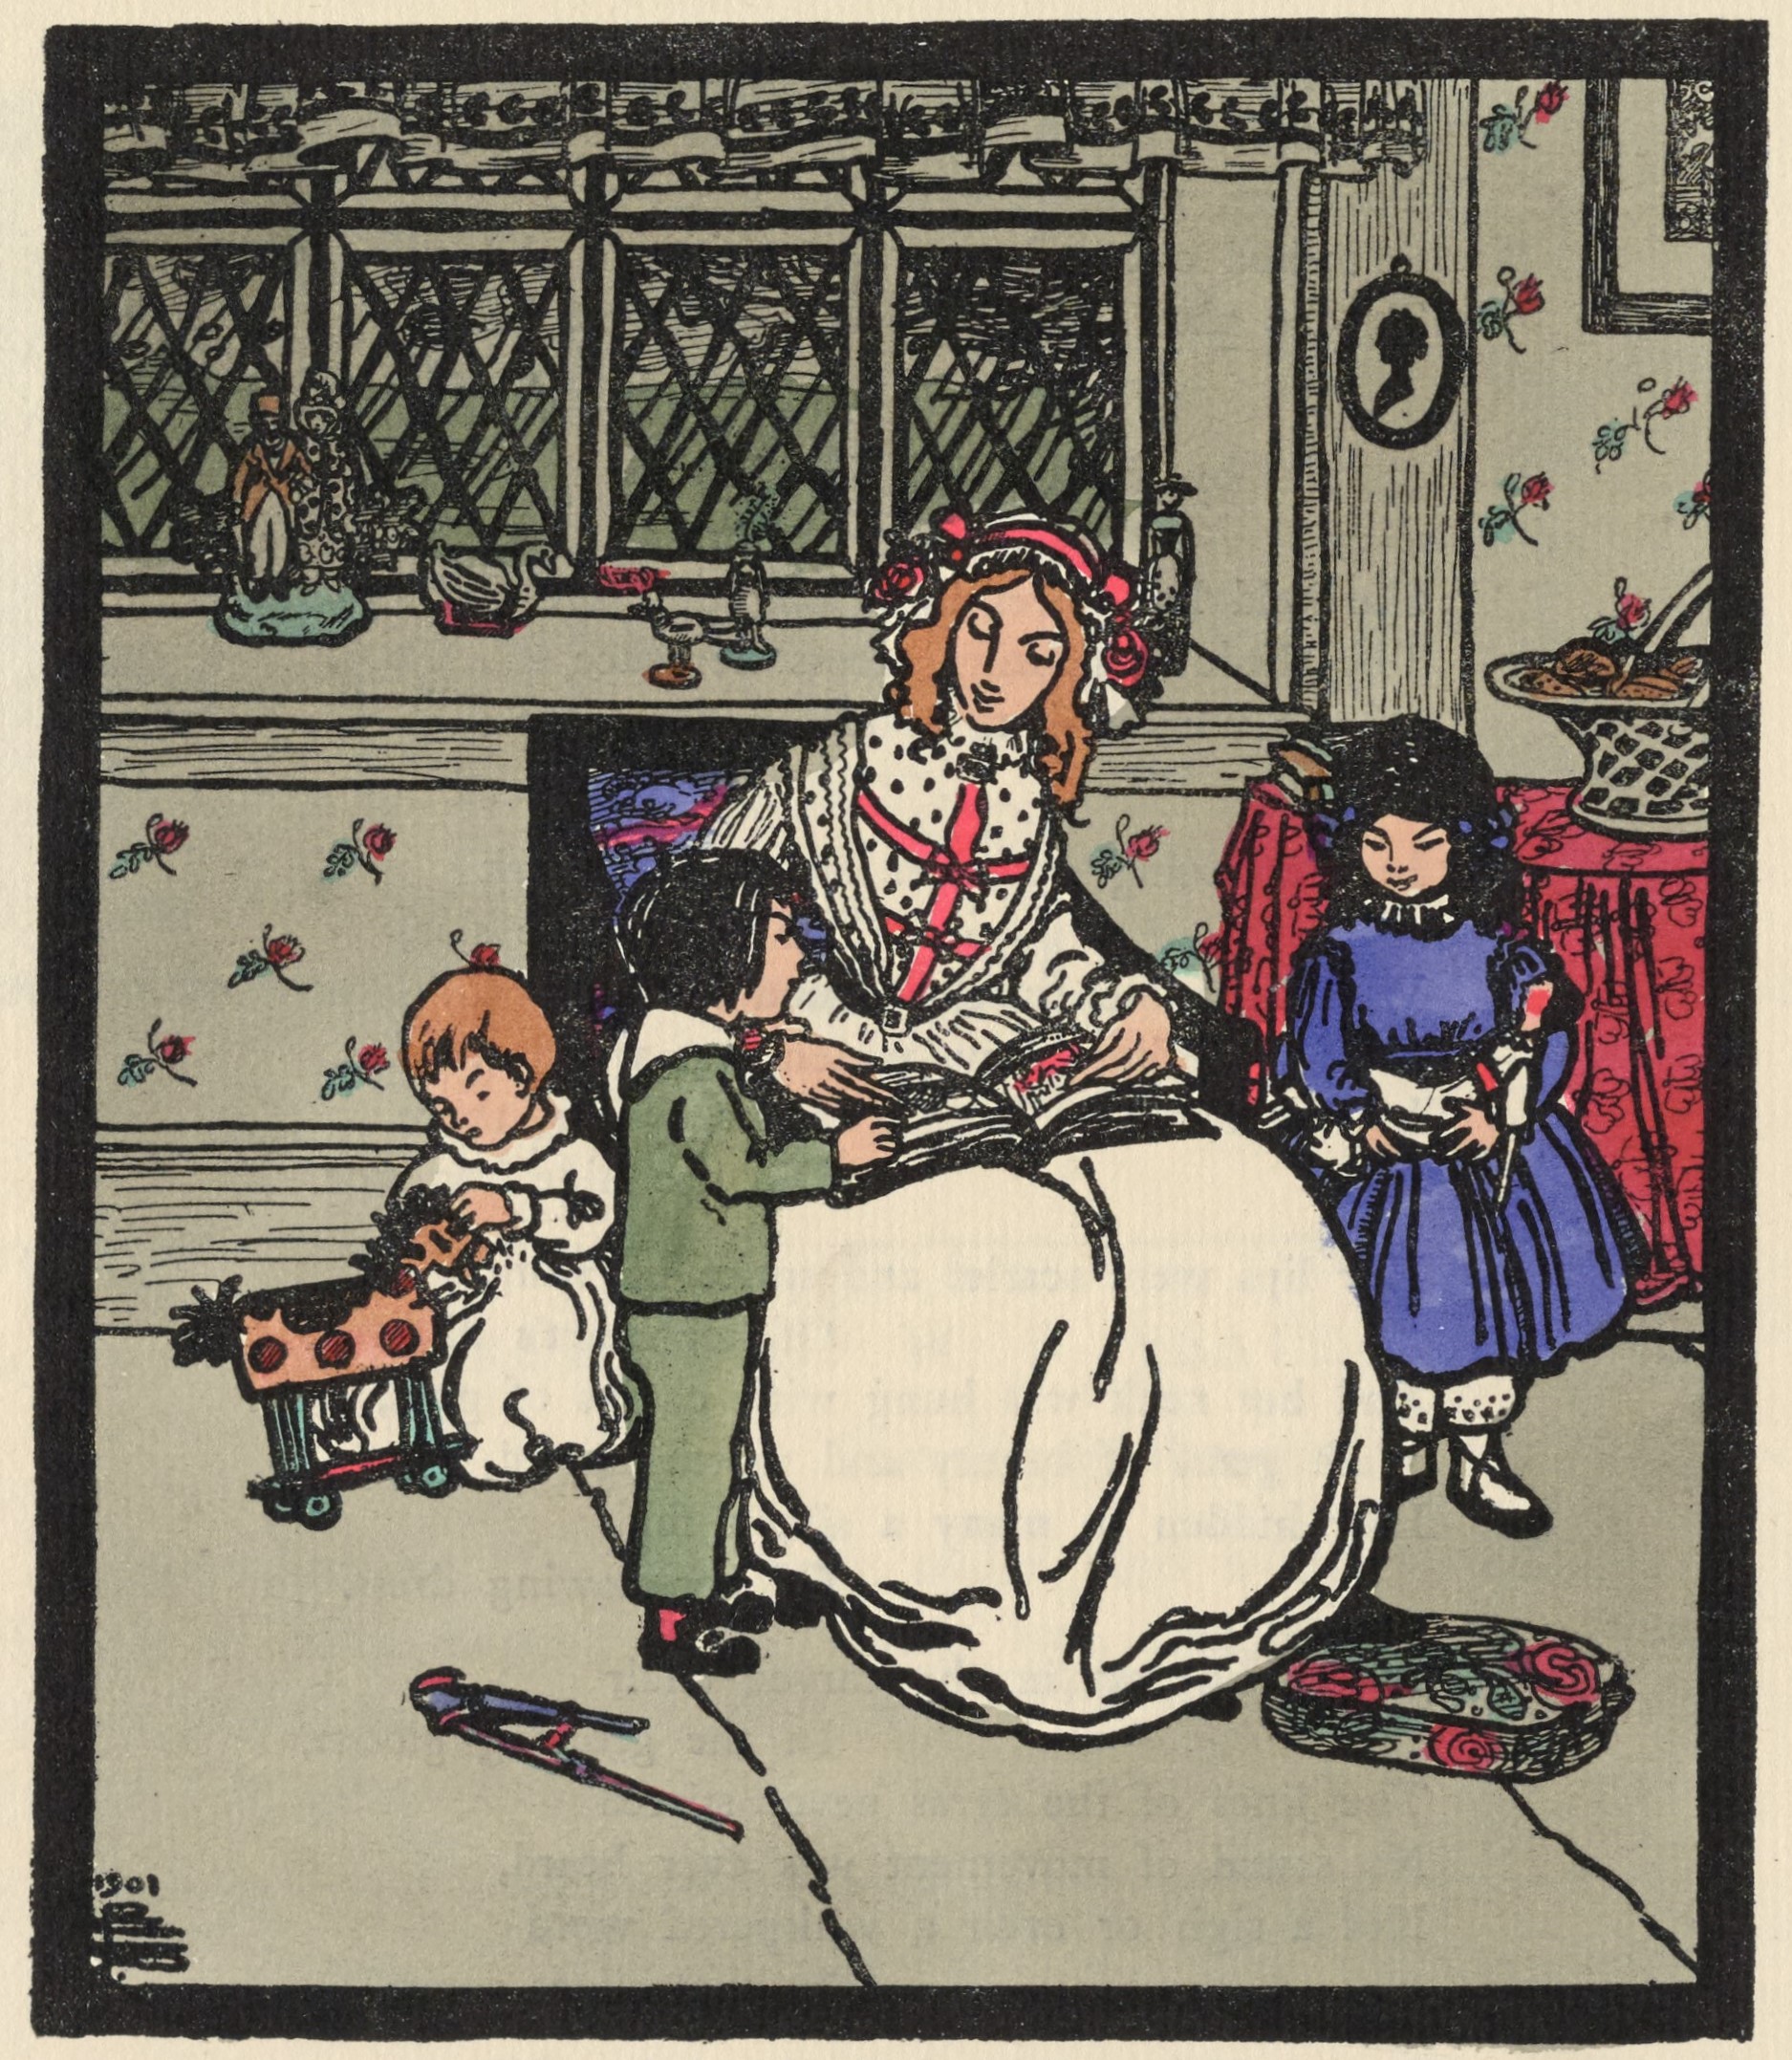 This hand-coloured image is centered on the page, occupying three-quarters of the page, above the text. It is outlined in a thick black rectangular border, in portrait orientation. In the centre of the image, a pale-skinned woman with fair hair sits, facing the viewer, an open book on her lap. She wears a white dress and cap decorated with pink ribbons and roses. She is surrounded by three little children (from left to right): an infant in white, holding a horse on wheels; a young boy in green who stands by the woman’s skirts, looking at the book; and a little girl in purple, holding a doll, standing slightly behind the woman at left. The room is depicted in great detail; a pair of compasses and a rose-patterned cushion litter the floor, a basket of roses sits atop a table covered in a red cloth, and a framed cameo of a woman’s profile hangs on the wall. Behind the woman, rose wallpaper coats the walls, in which is inset a diamond-barred window. Several figurines line the window’s ledge, including a man and woman arm-in-arm, a swan, a large bird, a child and a woman. The artist’s monogram is in the bottom left corner of the frame, with the date 1901.